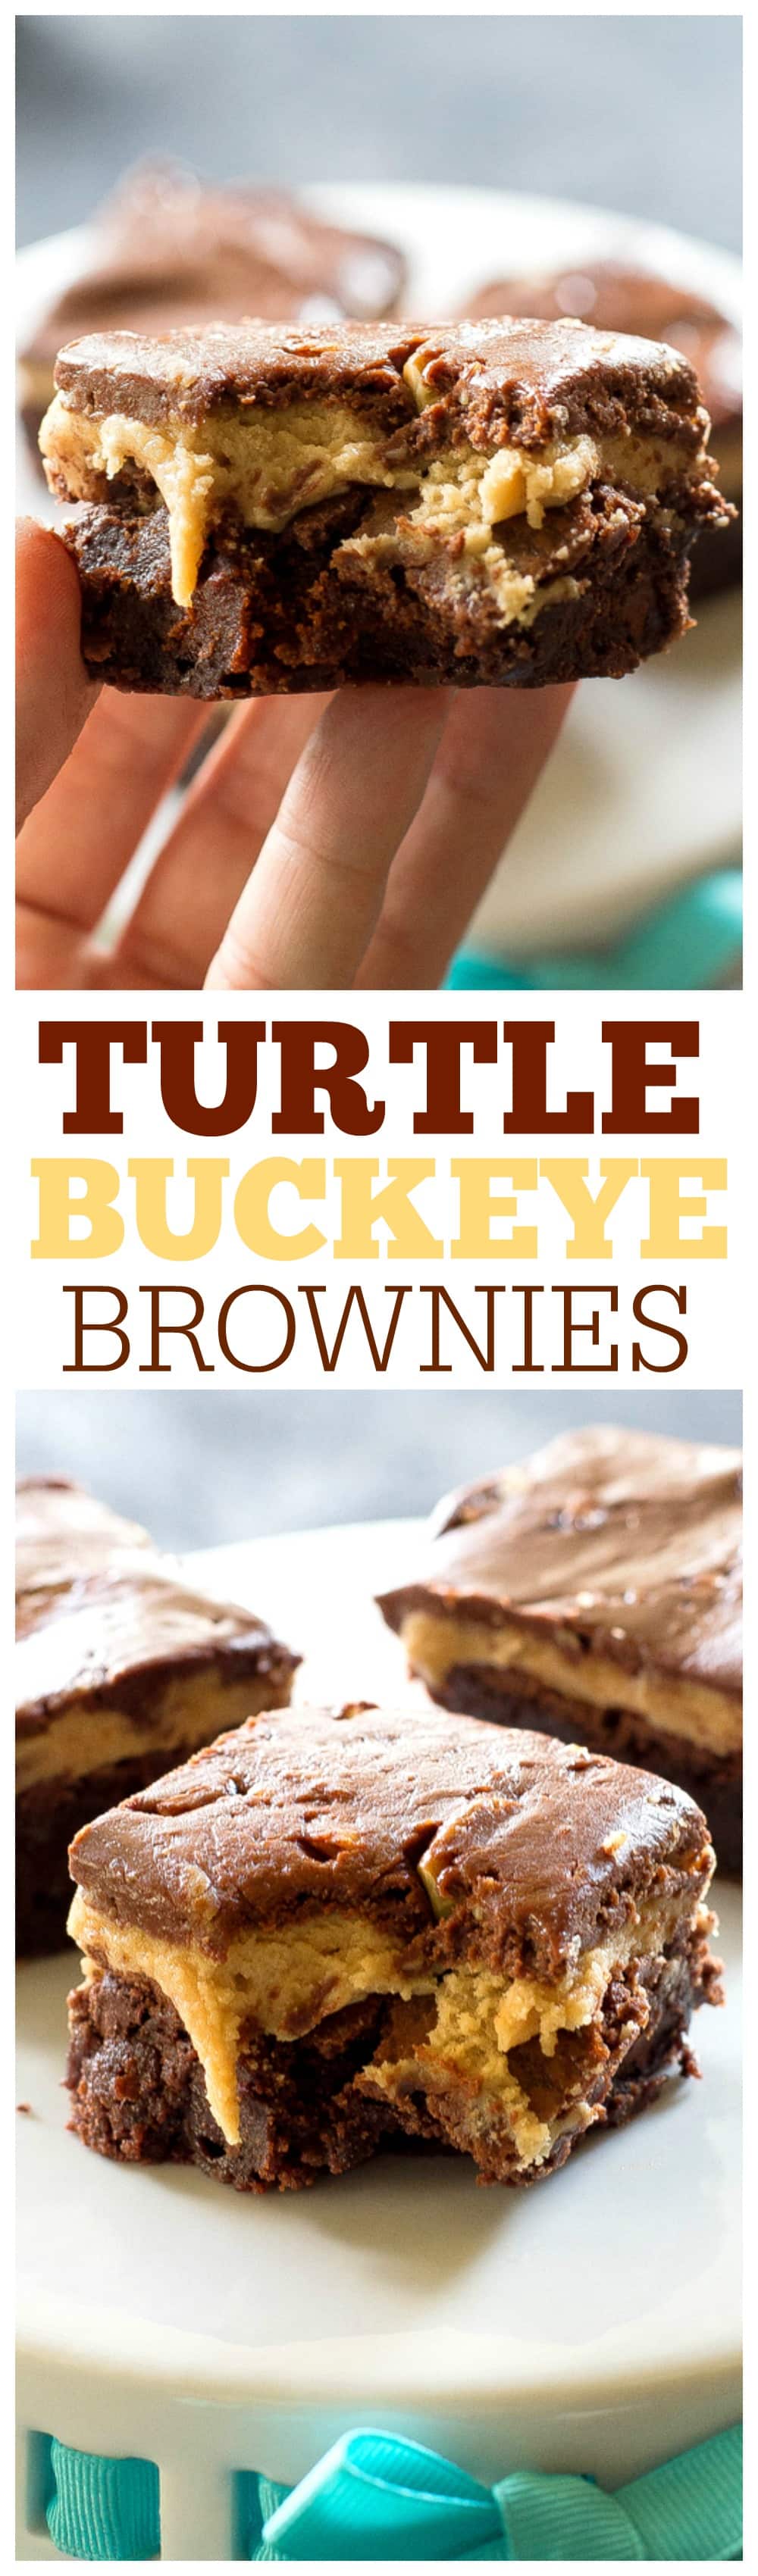 Turtle Buckeye Brownies - rich chocolate brownies, a peanut butter truffle layer and topped with a caramel chocolate pecan layer. The ultimate decadent dessert. #turtle #buckeye #brownies #chocolate #dessert #recipe